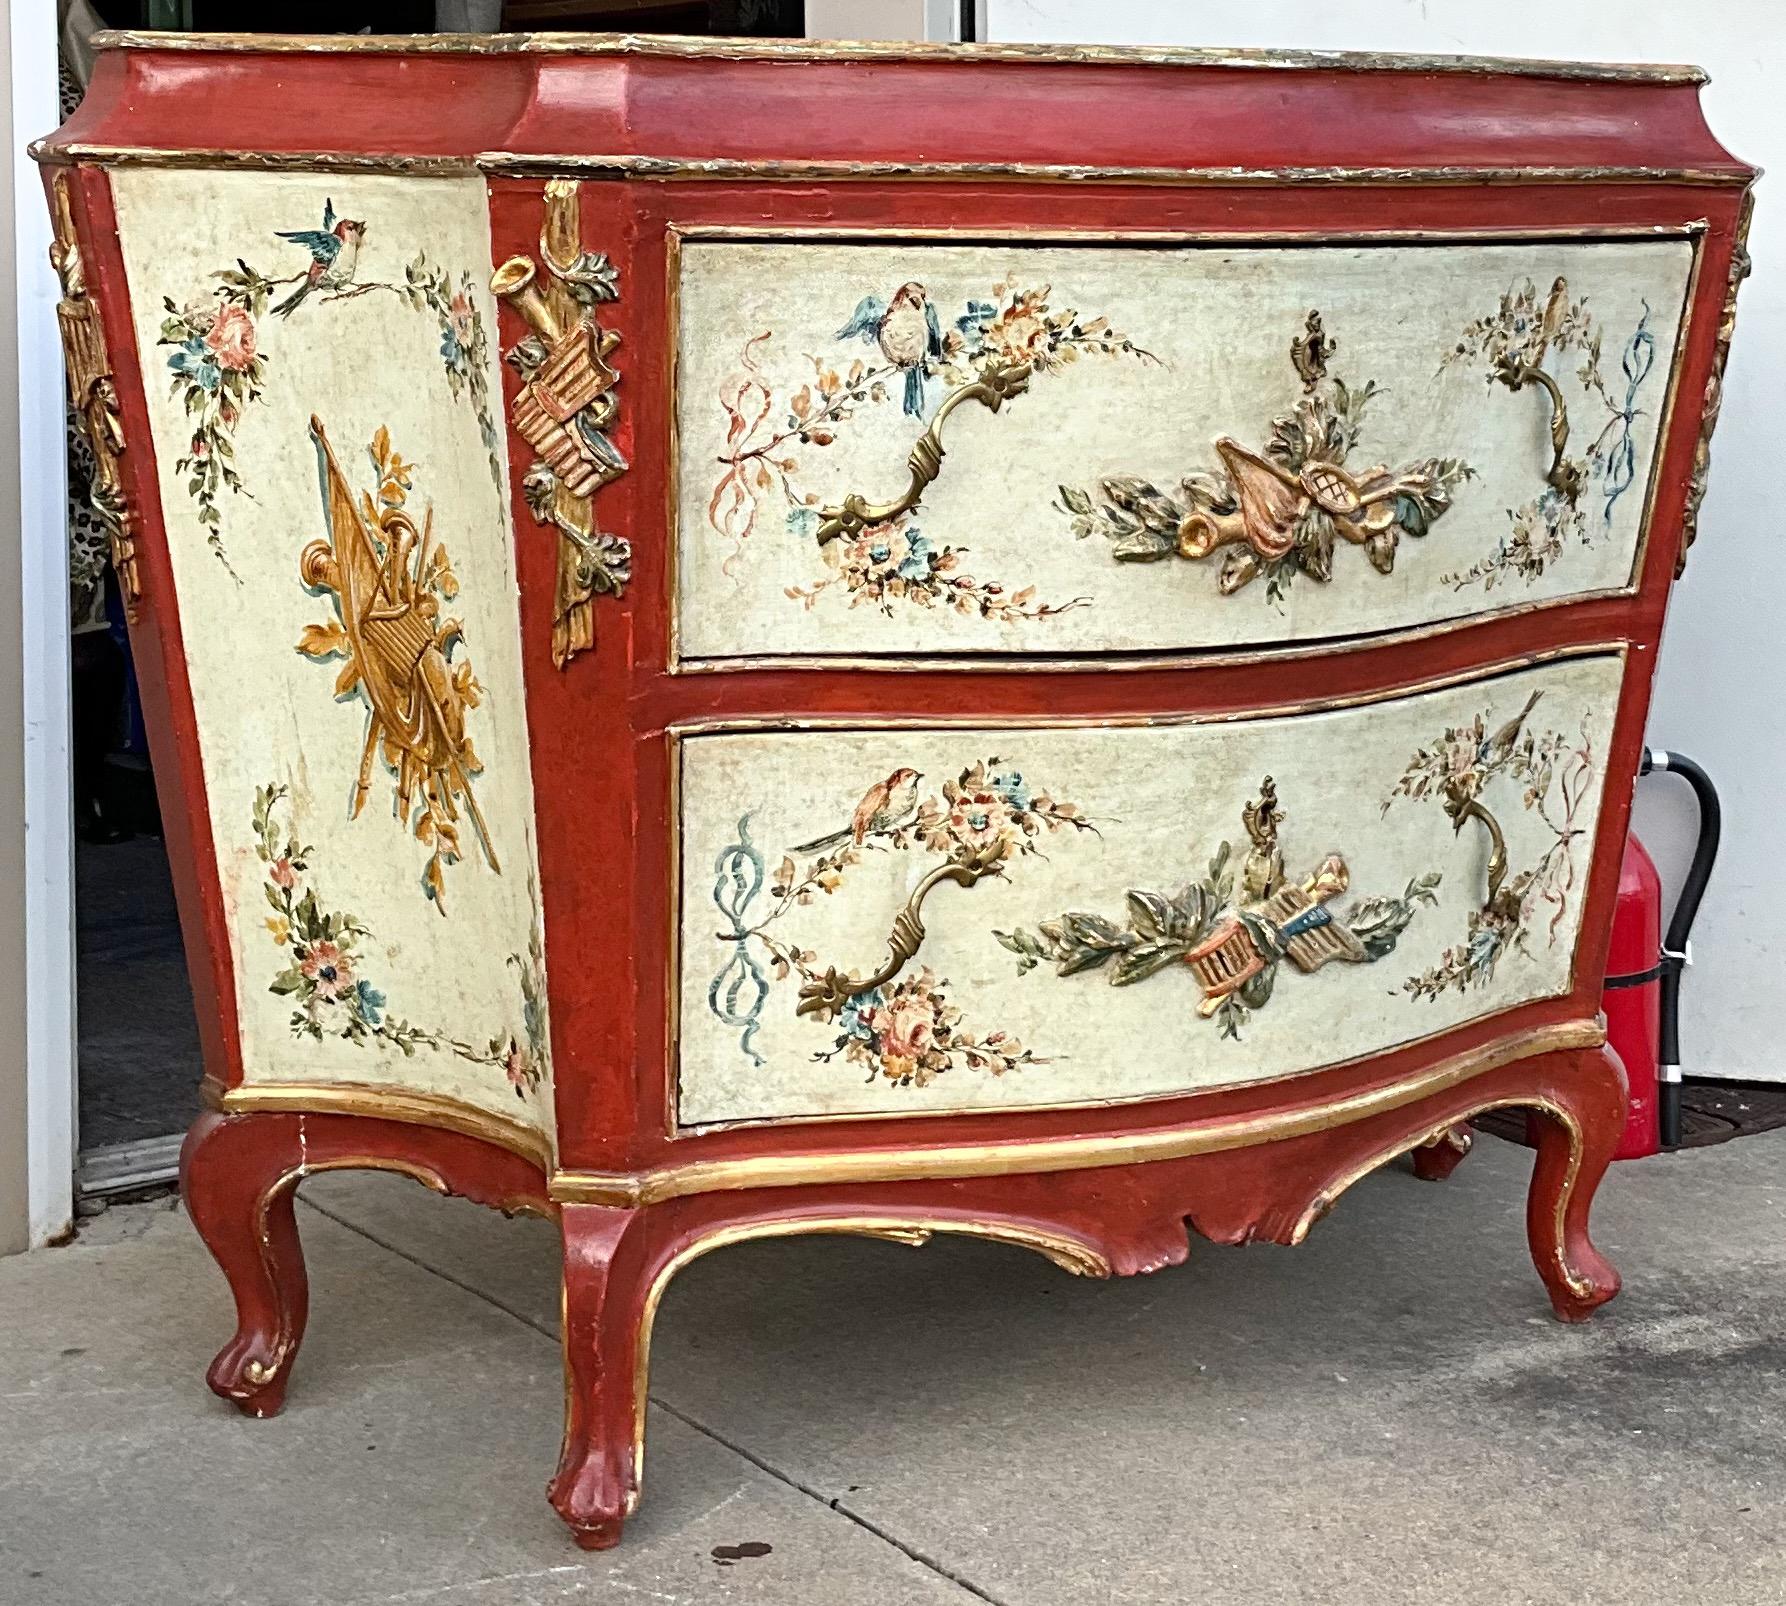 This is a breathtaking 19th century Venetian Rococo style commode. It is hand painted and beautifully done. The piece depicts birds, ribbons and instruments as well as floral swags. It is in very good antique condition.